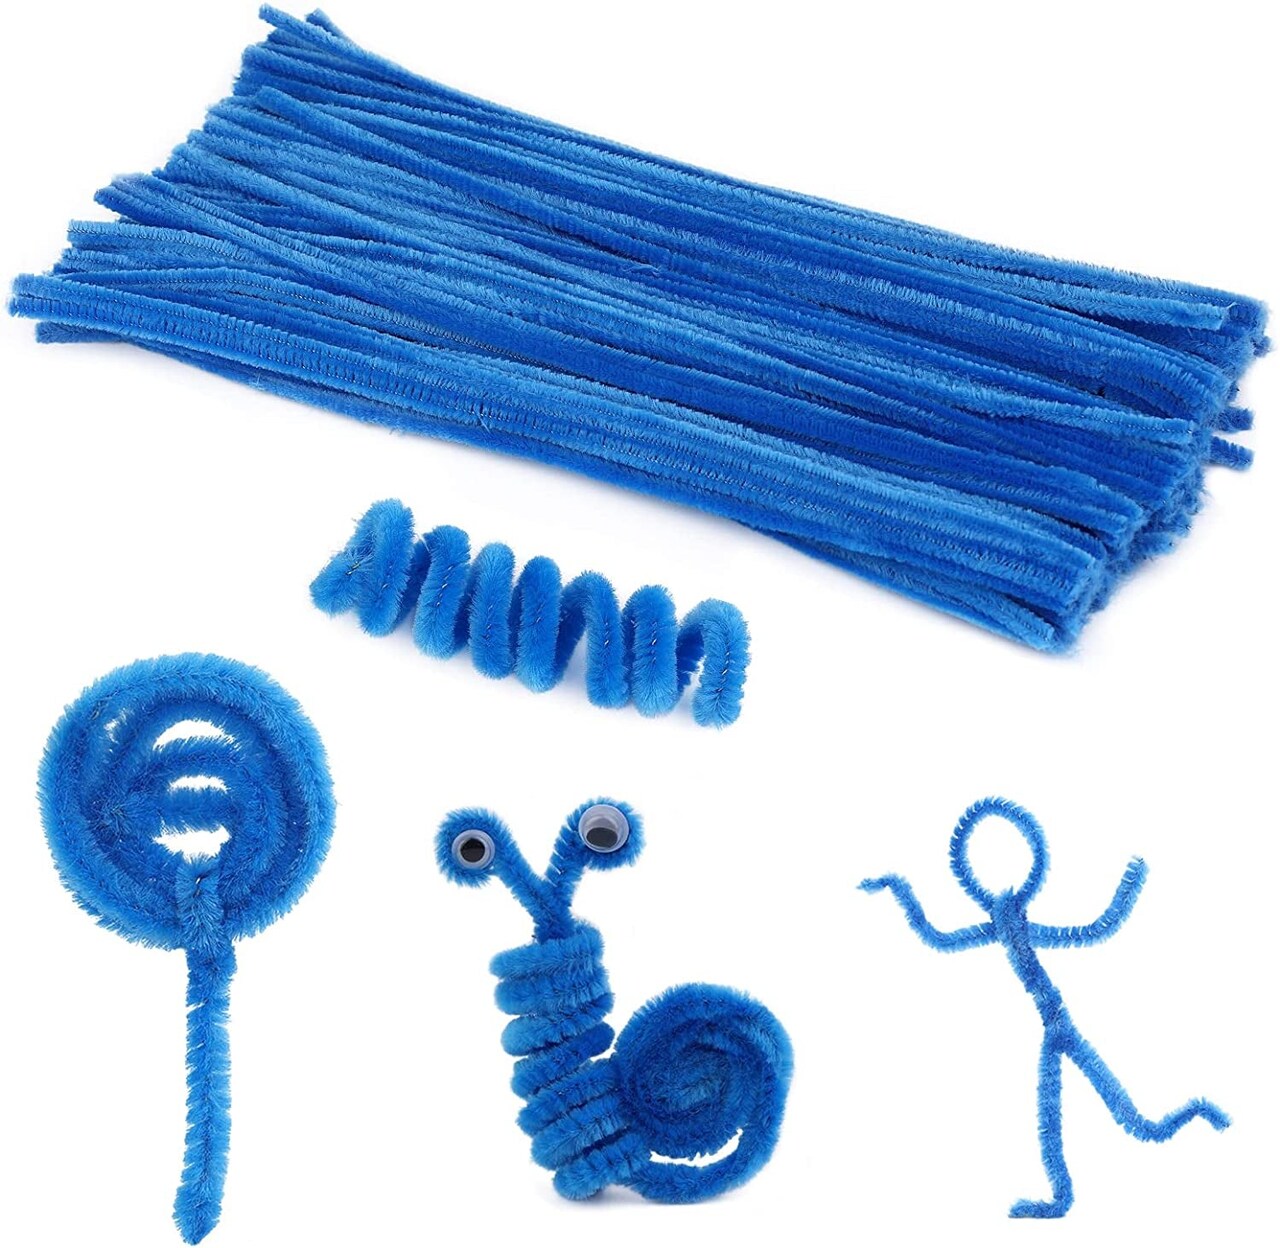 100 Pieces Pipe Cleaners Chenille Stem, Solid Color Pipe Cleaners Set for  Pipe Cleaners DIY Arts Crafts Decorations, Chenille Stems Pipe Cleaners  (Green)